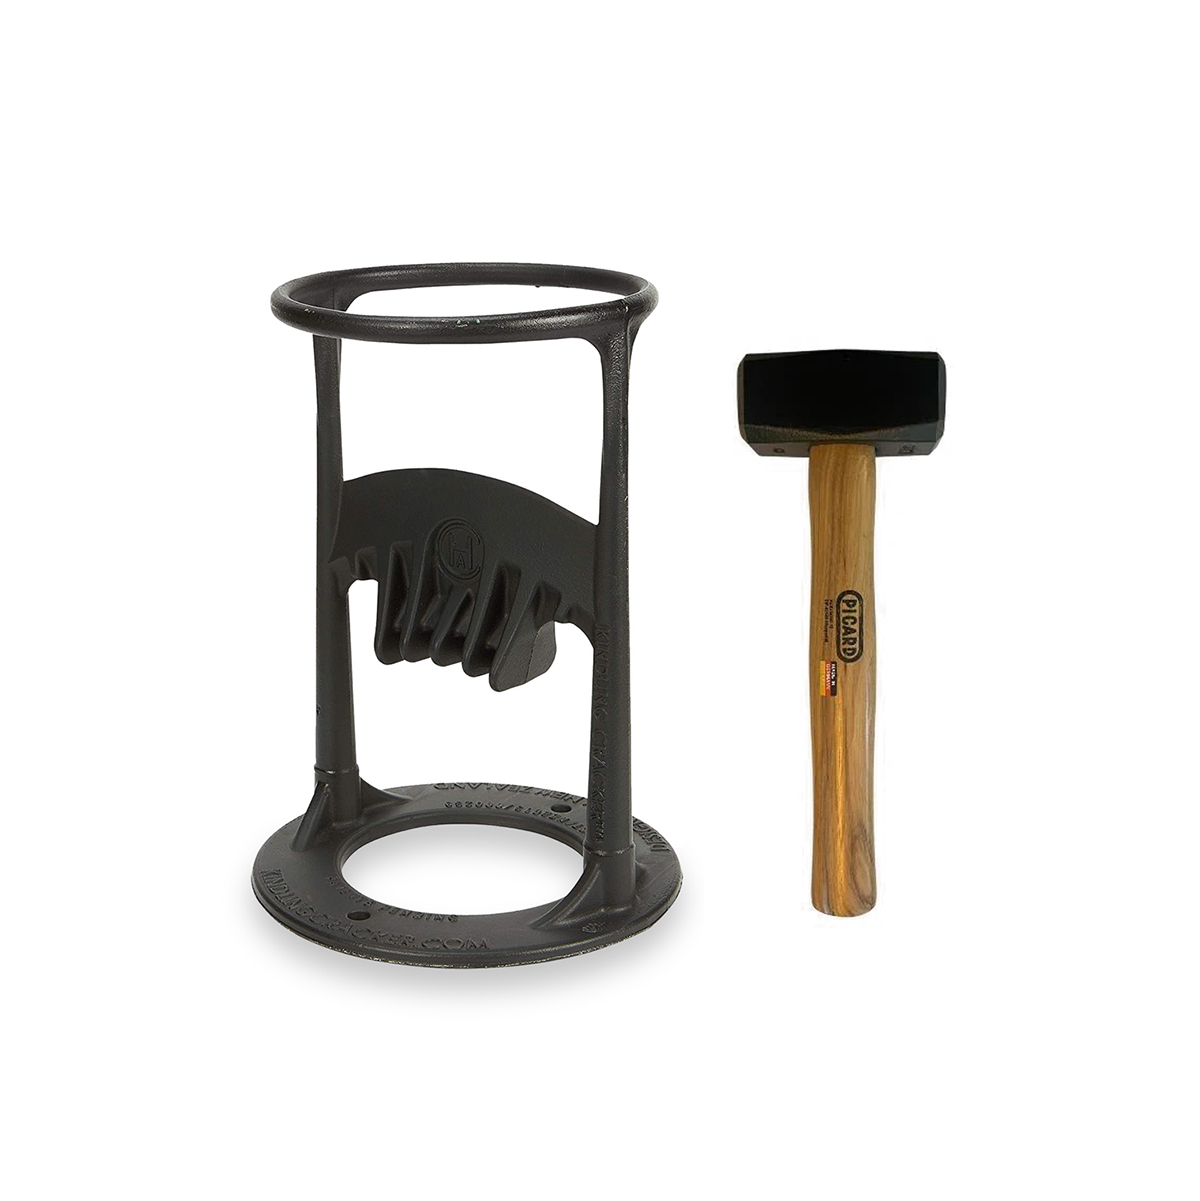 Kindling Cracker Original with hammer - Igneus pizza oven accessories